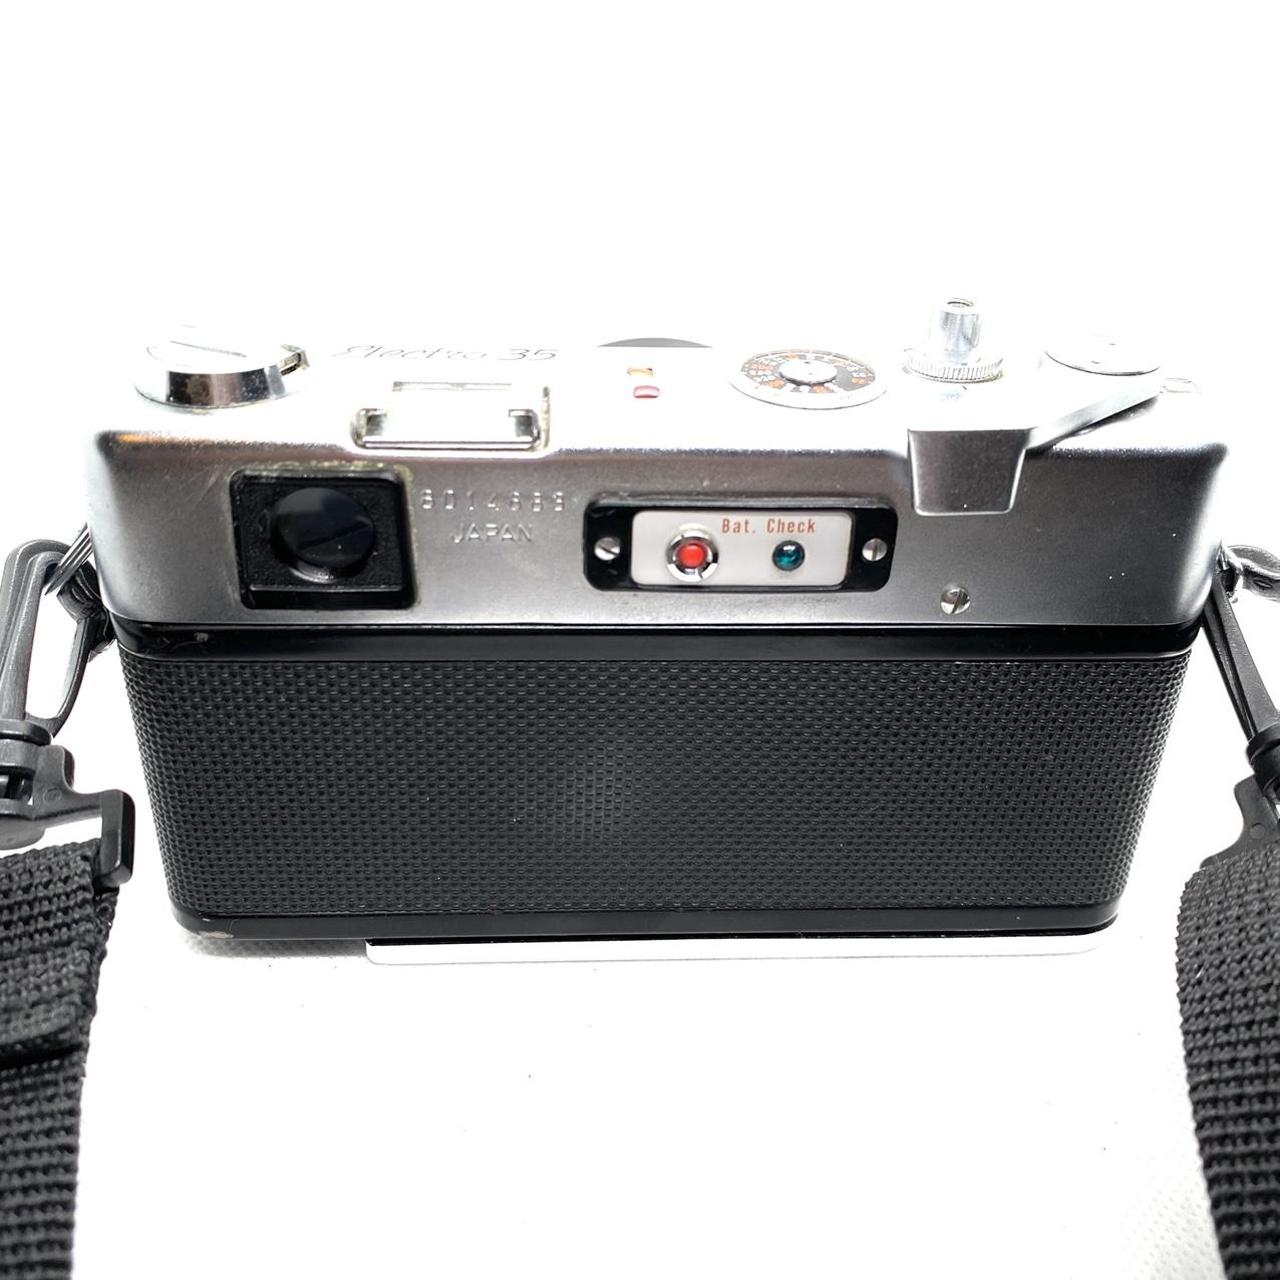 Yashica Silver and Black Cameras-and-accessories (3)